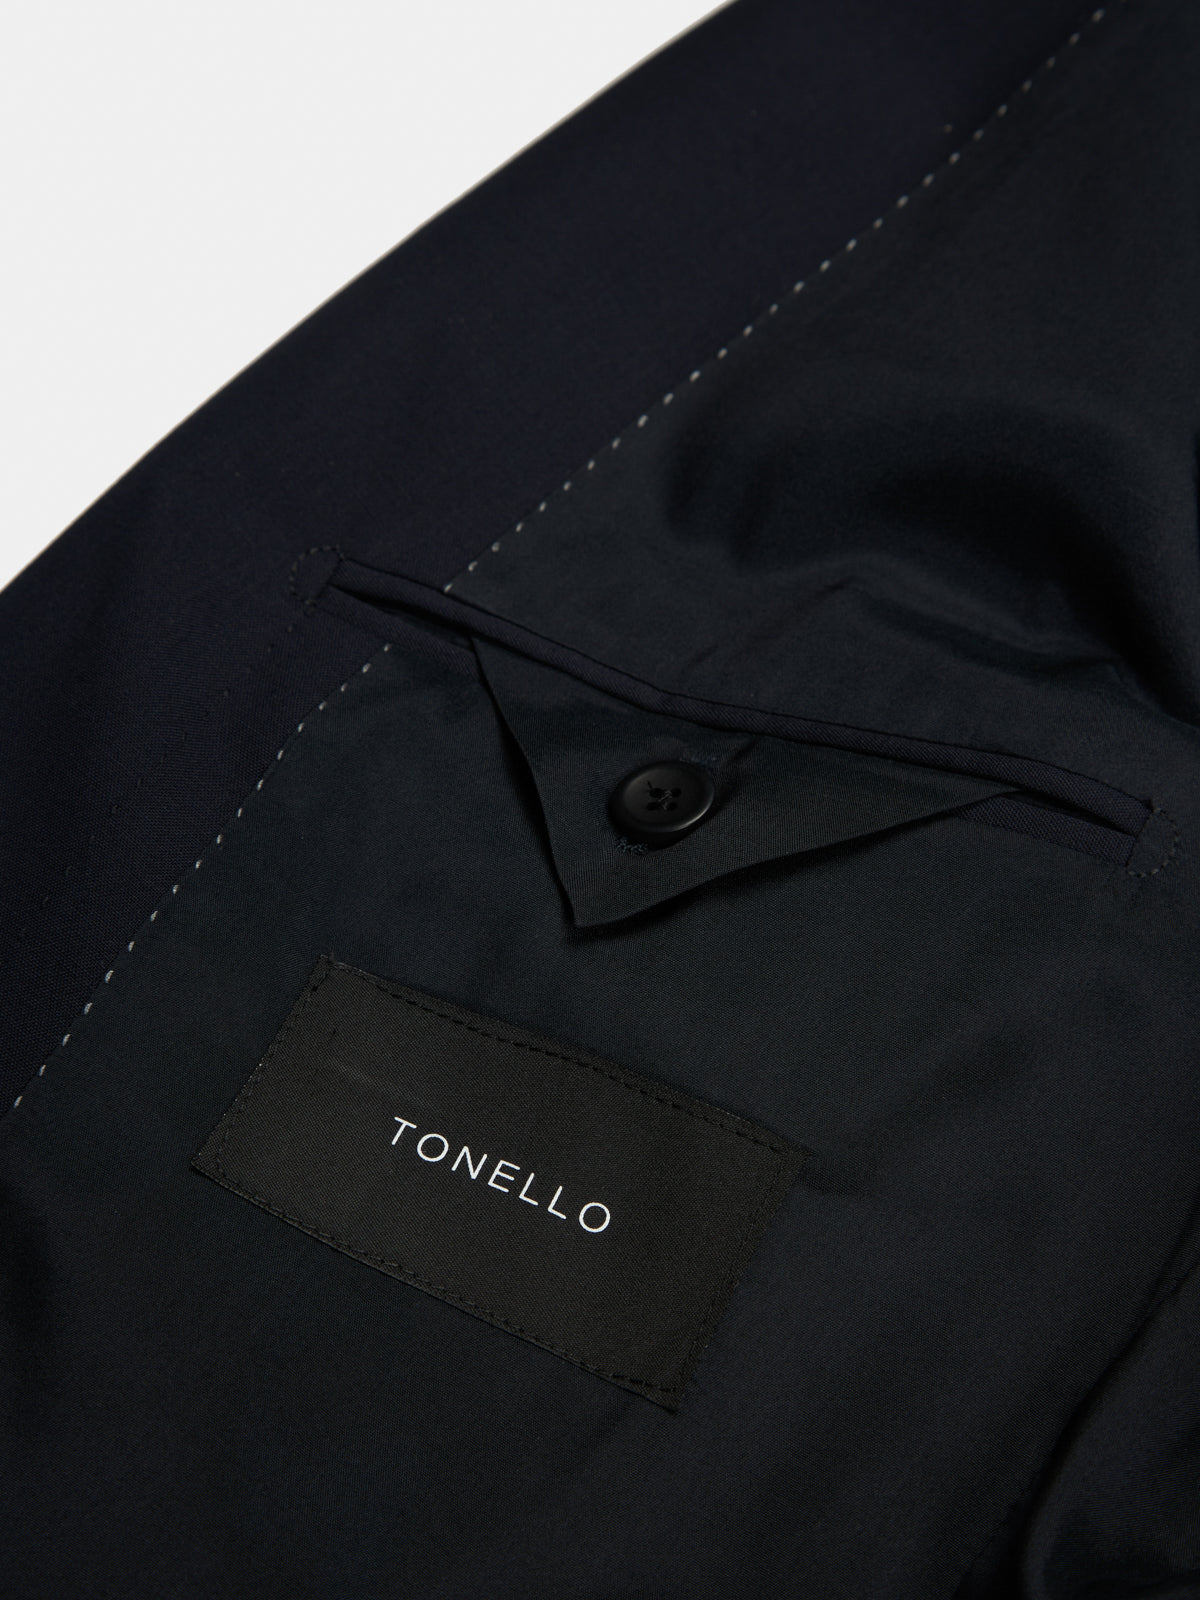 Iconic TONELLO dress in blue Drop 8 cool wool